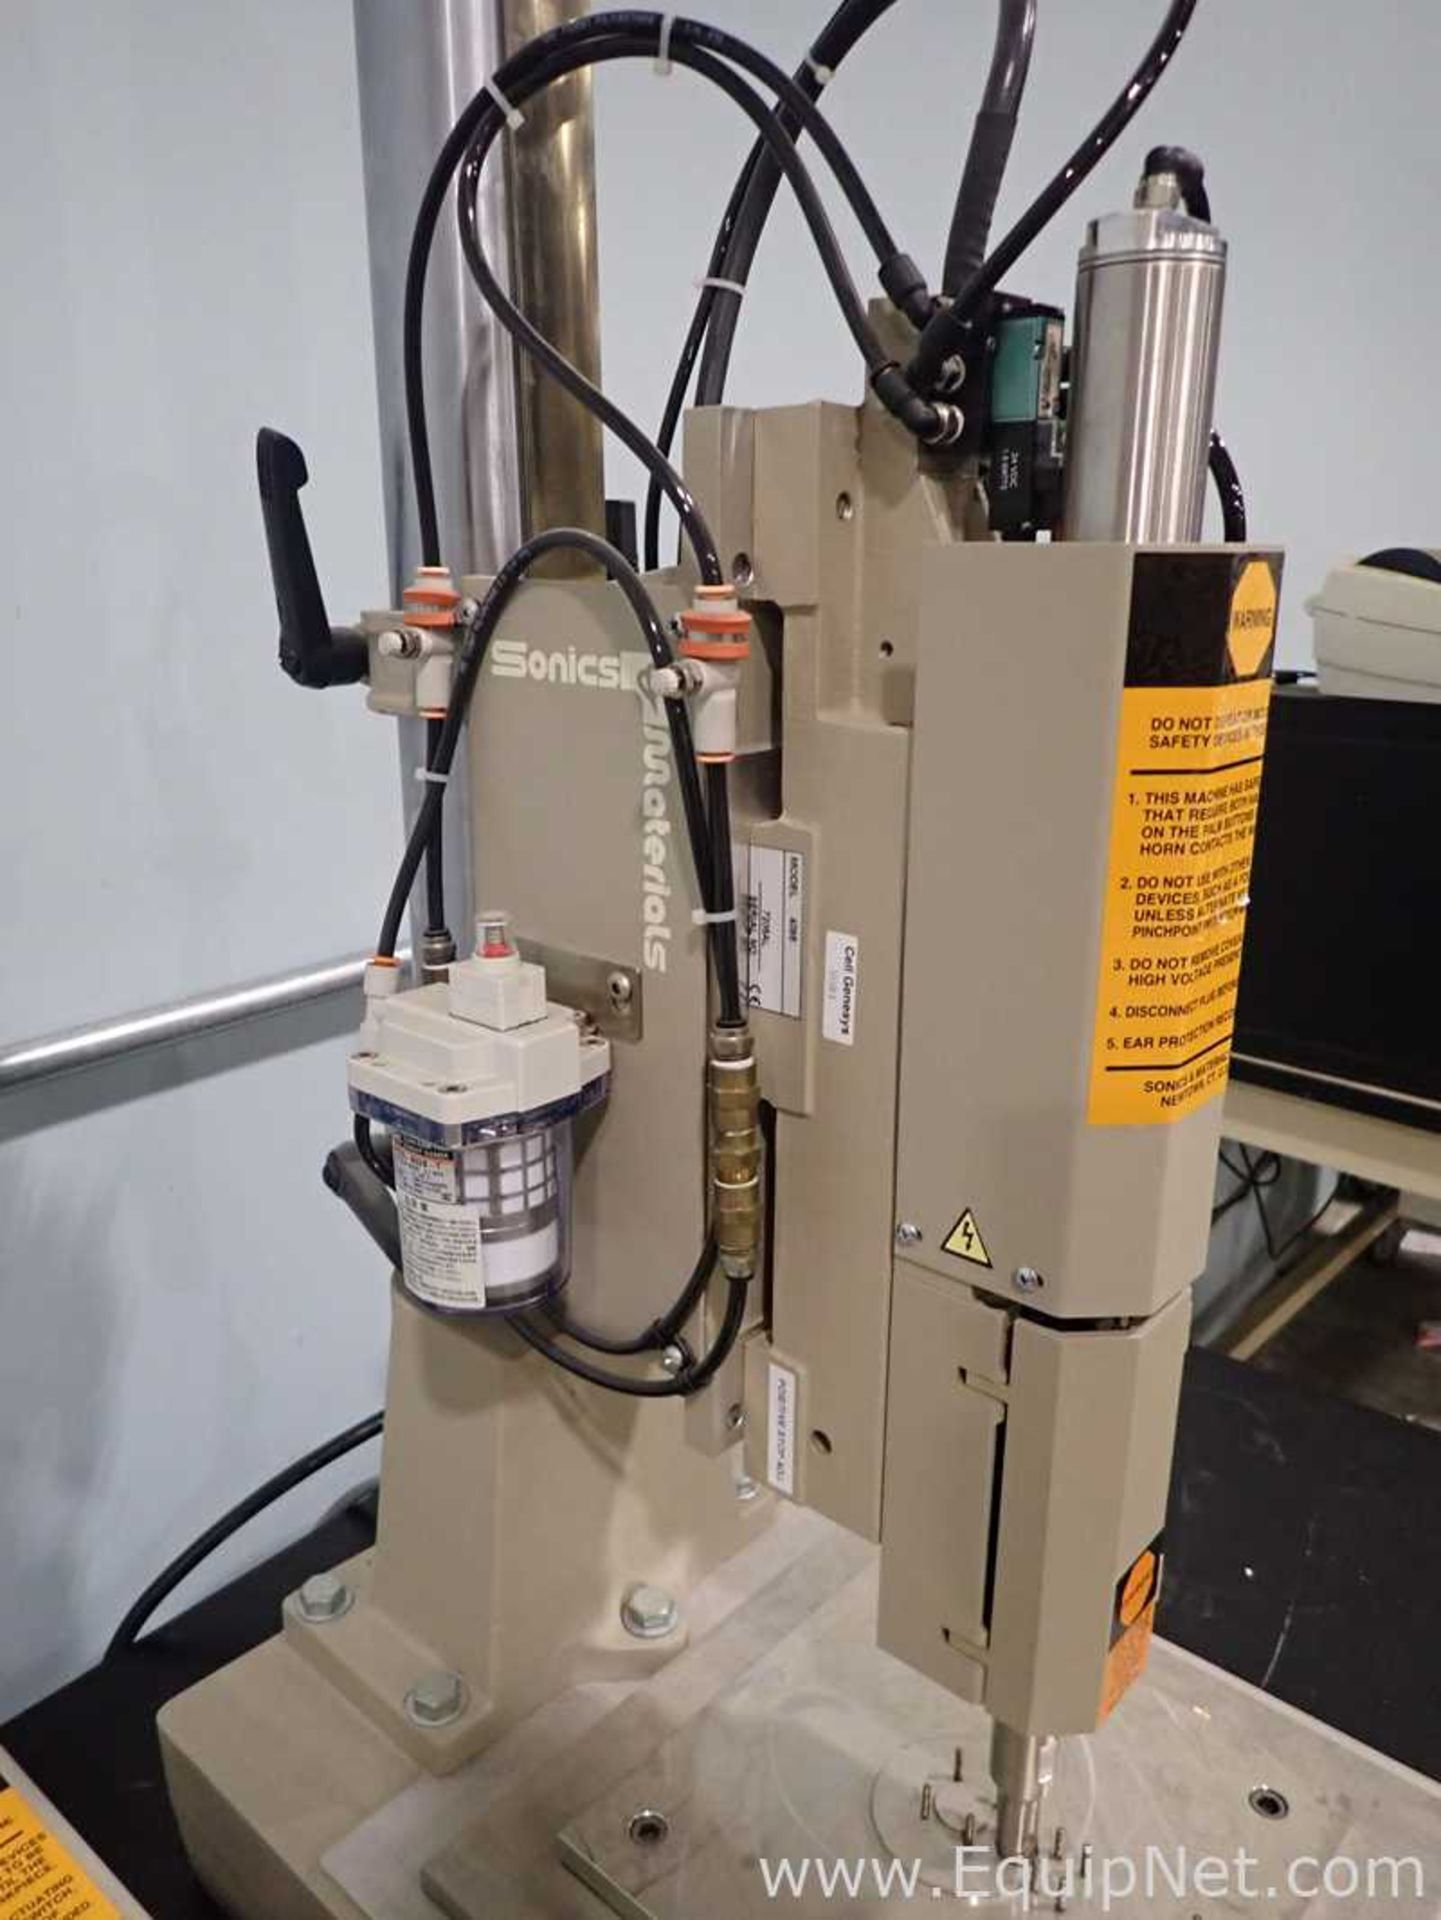 Sonics and Materials 4095 Pneumatic Press with Microsonic Processor for Ultrasonic Plastic Assembly - Image 5 of 13